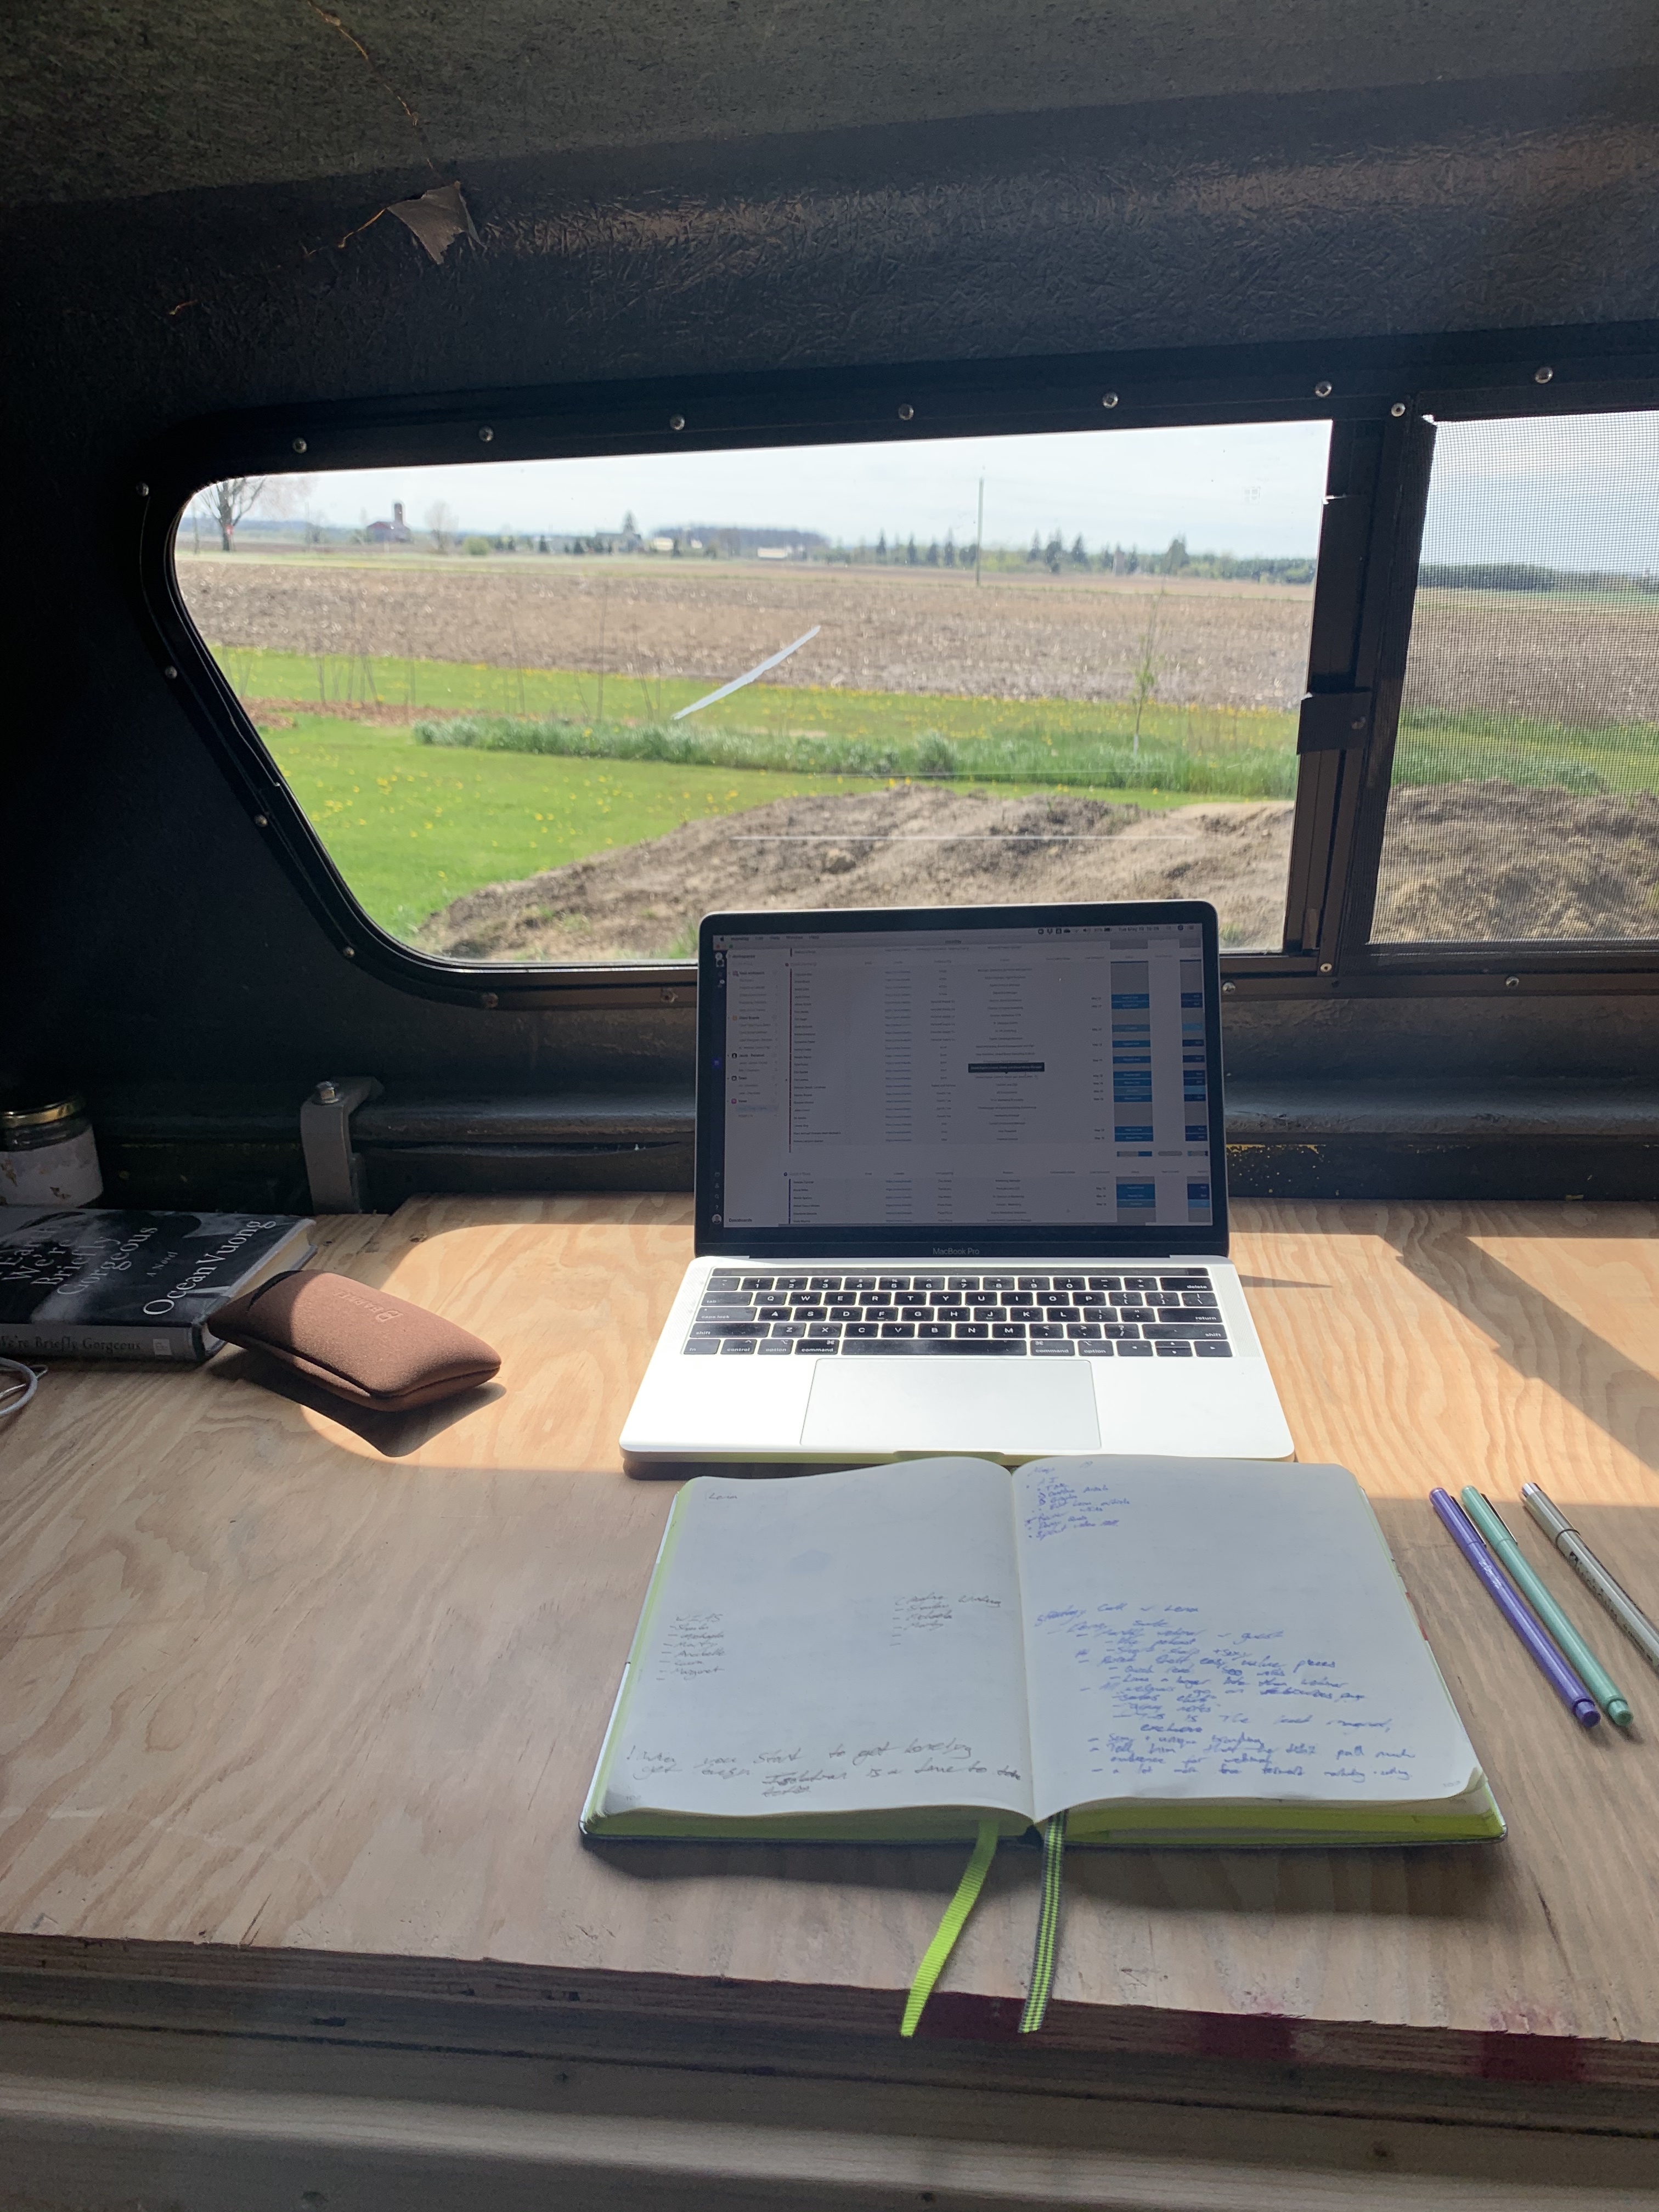 RV work from home set up with a laptop and an open book with views of a field.